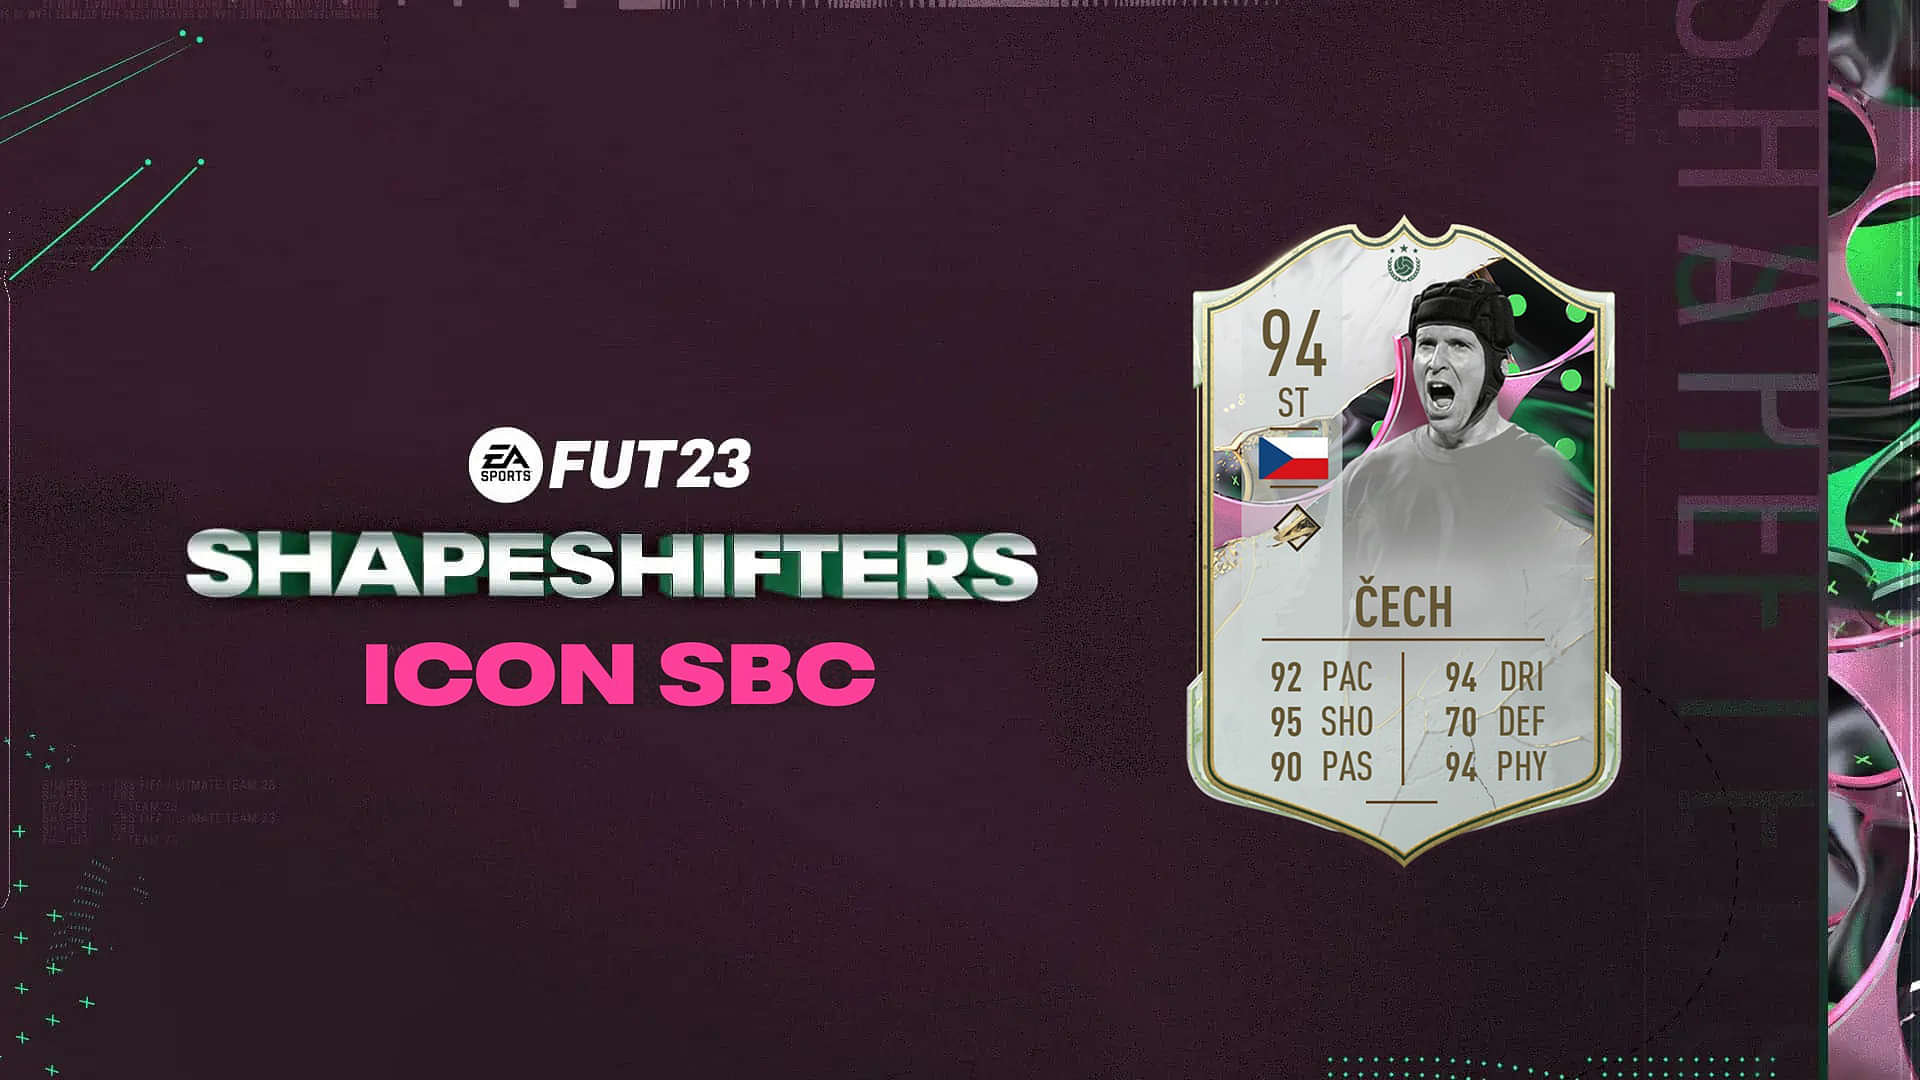 FIFA 23 Petr Cech Shapeshifters Icon SBC: How to acquire this Legend's card? - The SportsRush